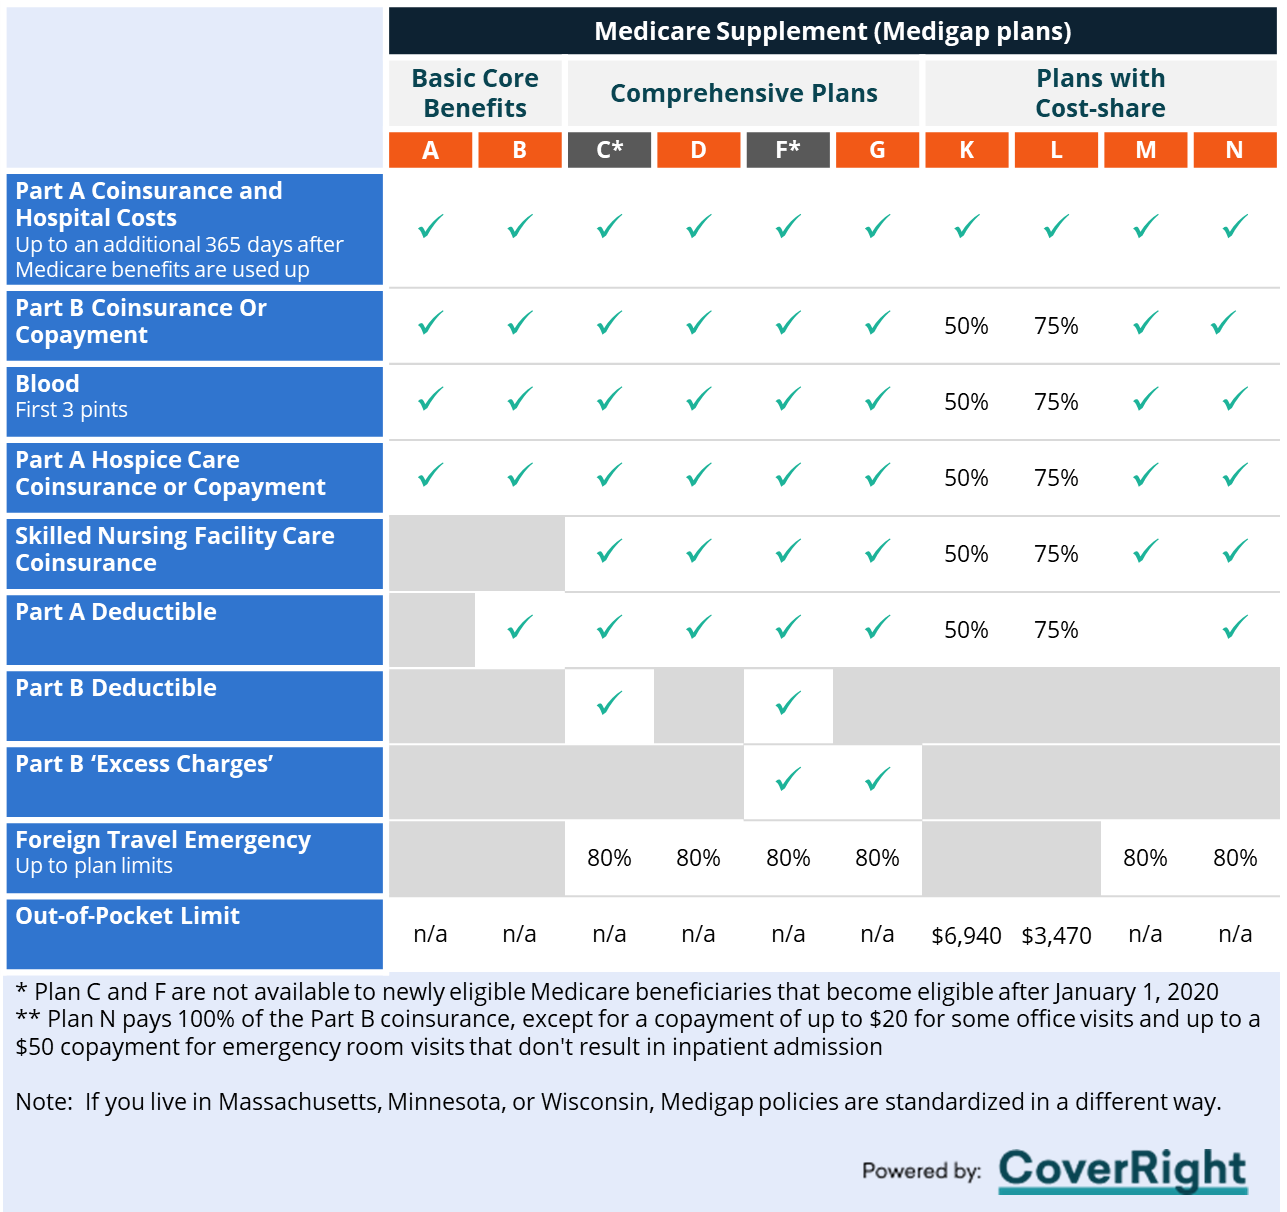 medicare supplement plans from coverright